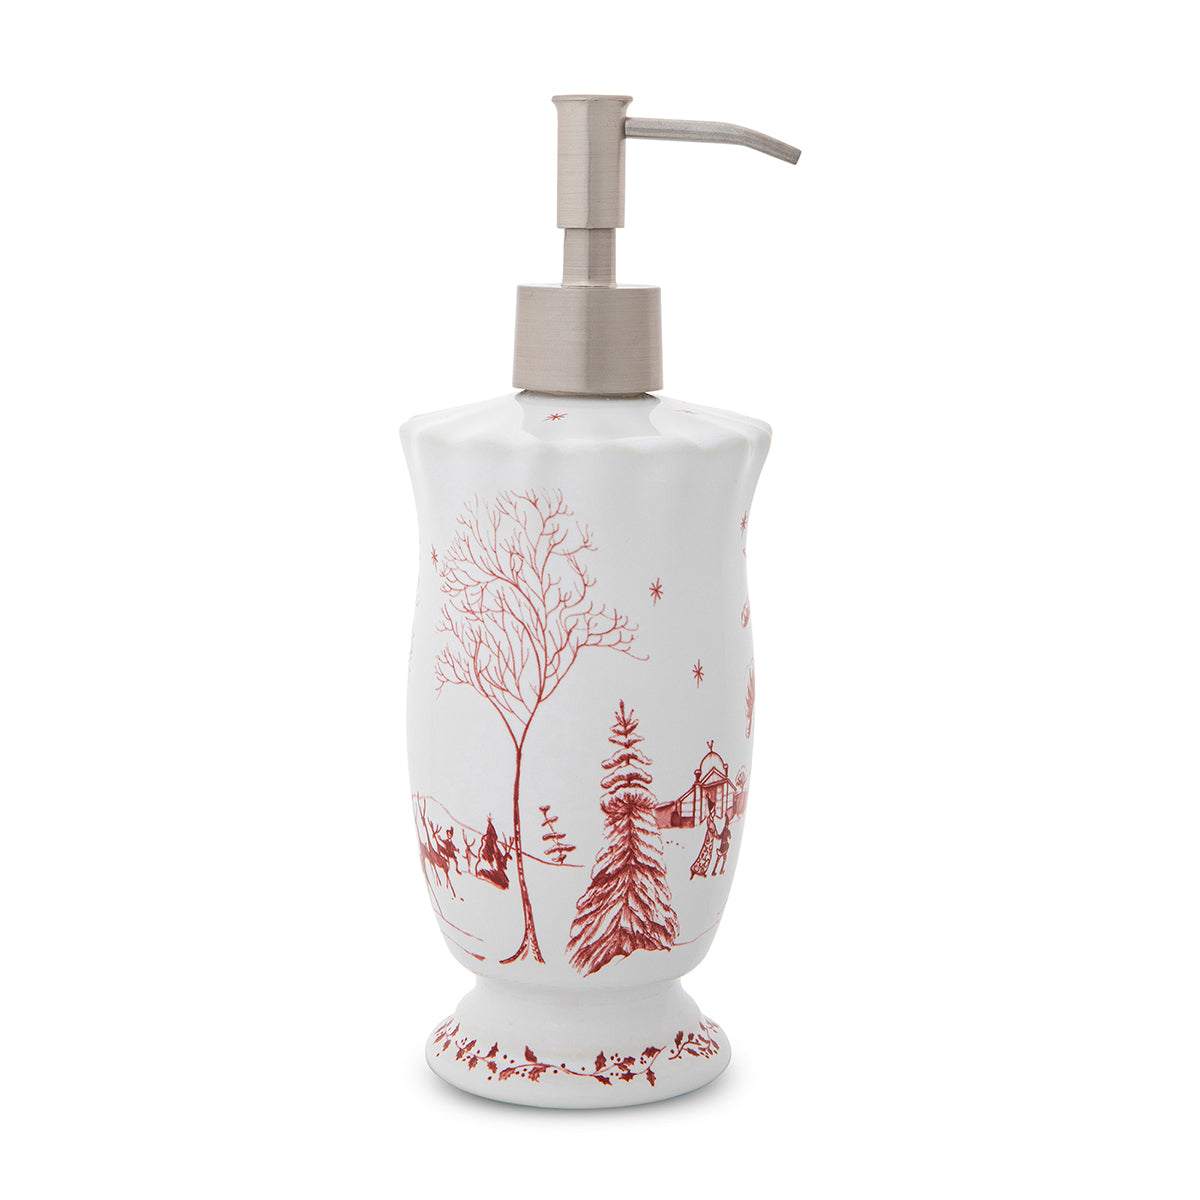 Country Estate Winter Frolic Ruby Soap/Lotion or Hand Sanitizer Dispenser